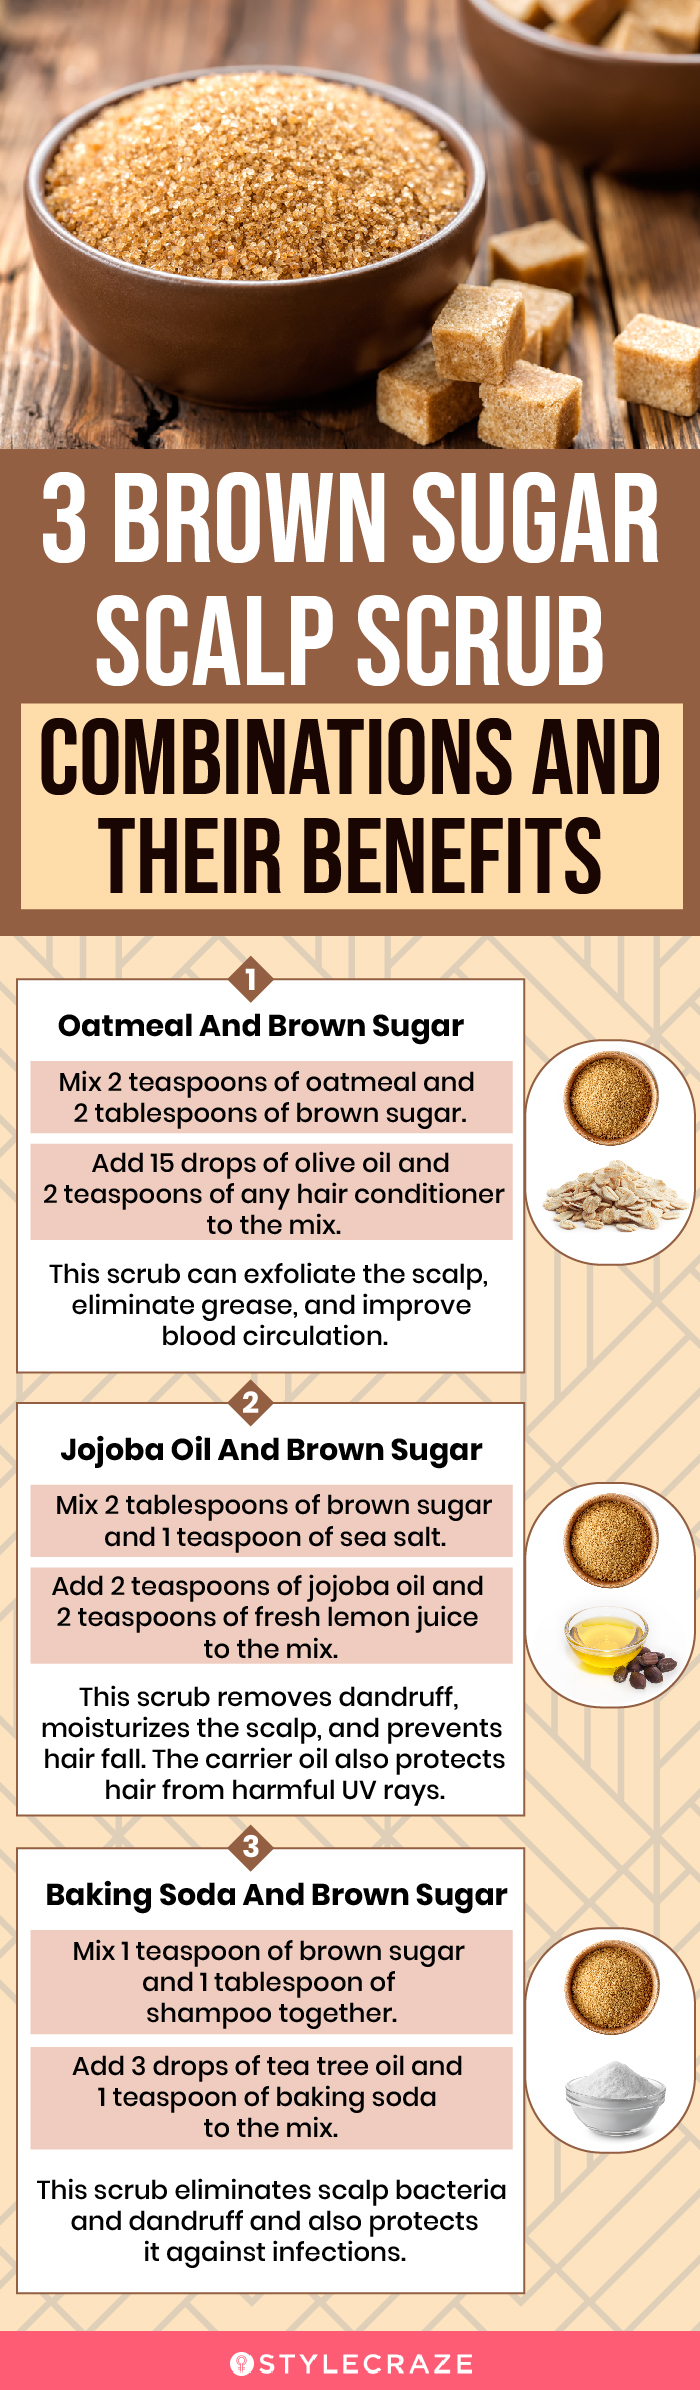 3 brown sugar scalp scrub combinations and their benefits (infographic)